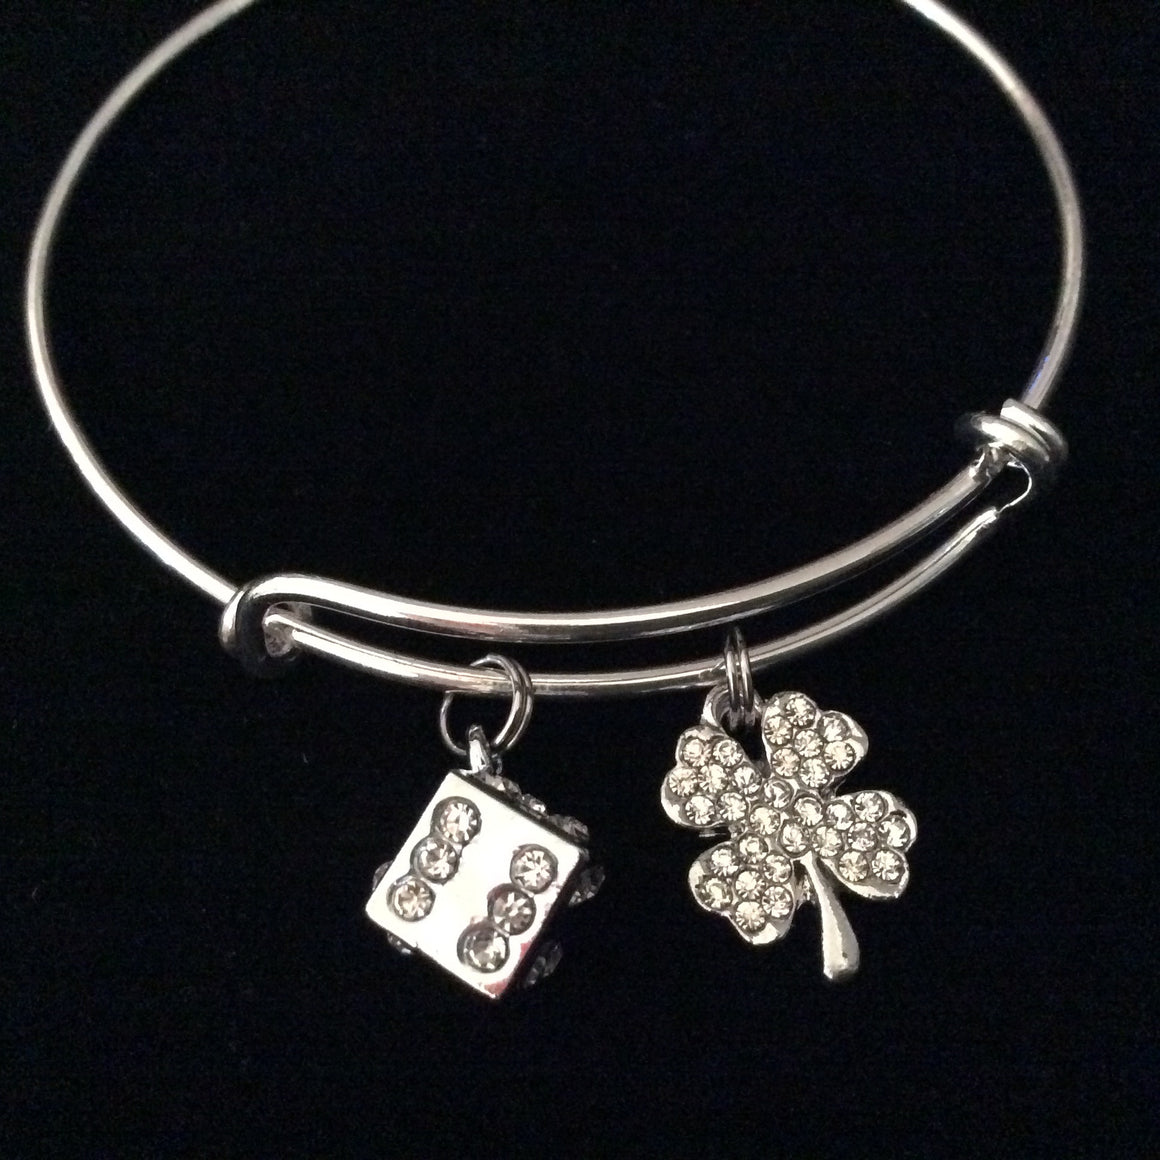 Lady Luck Rhinestone Crystal Dice and Four Leaf Clover Charm on Silver Expandable Adjustable Wire Bangle Bracelet Stacking Handmade Trendy Casino Gift